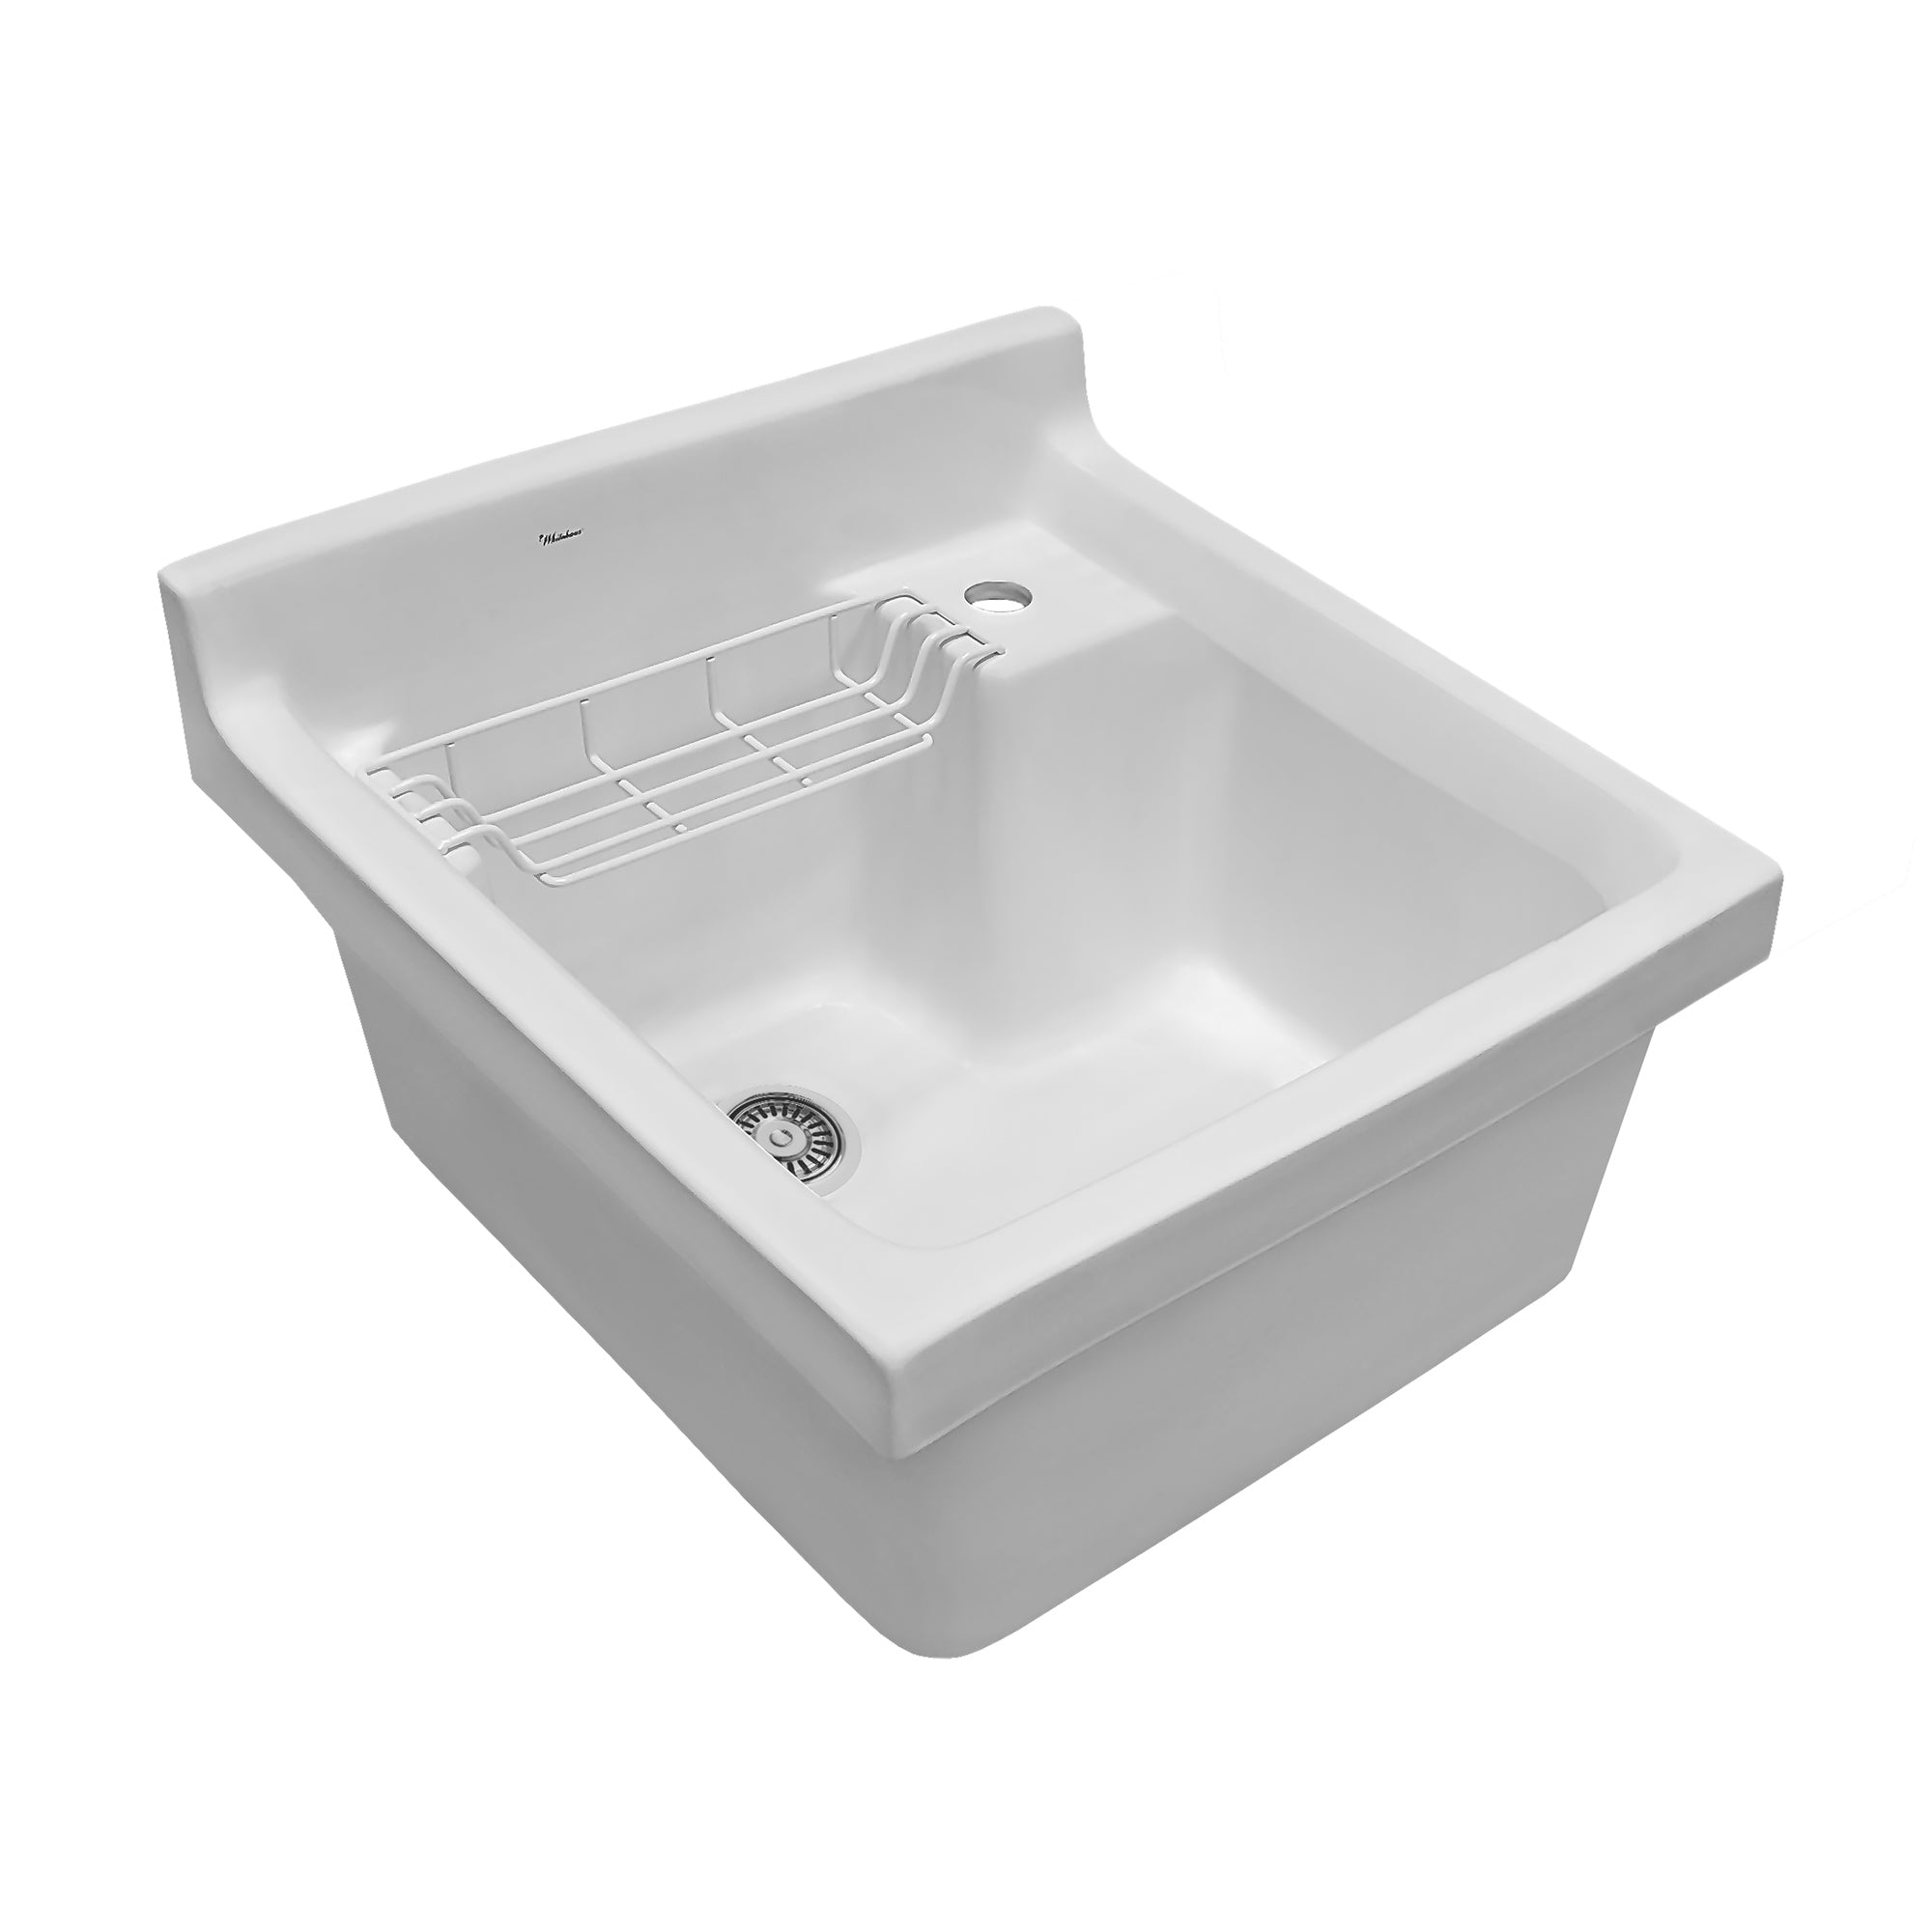 Vitreous Single Bowl, Drop-in Sink with Wire Basket and Off Center Drain Location